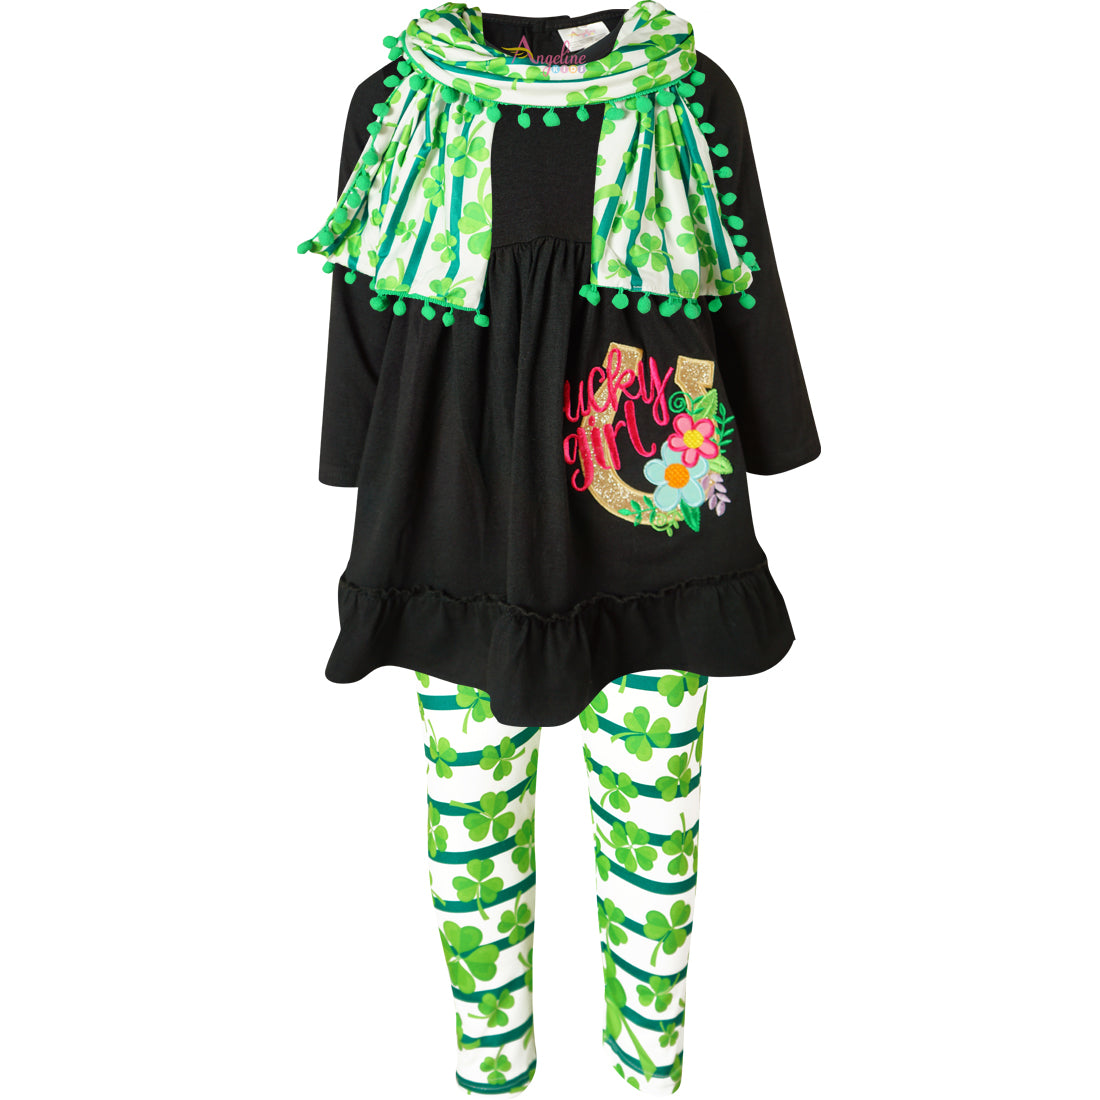 Baby Toddler Little Girls St Patrick Days Lucky Girl Scarf Outfit - Angeline Kids